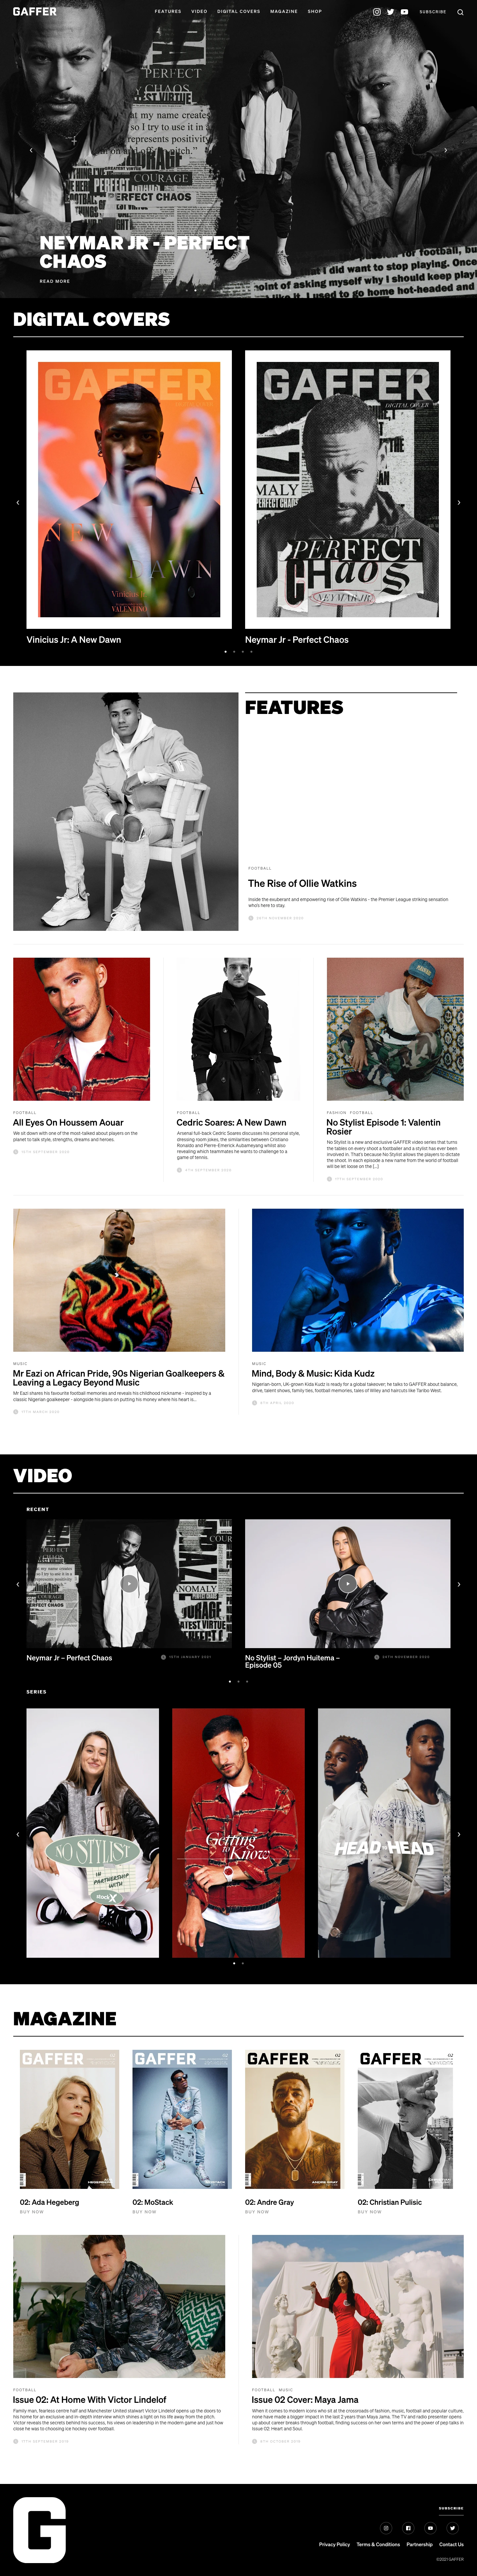 GAFFER Landing Page Example: Bridging the gap between football, music, fashion and culture. GAFFER is committed to creating conversations that define our culture. All of our content amplifies the cross-cultural convergence of football, fashion and music, exploring new stories & new voices through original shows and exclusive features.